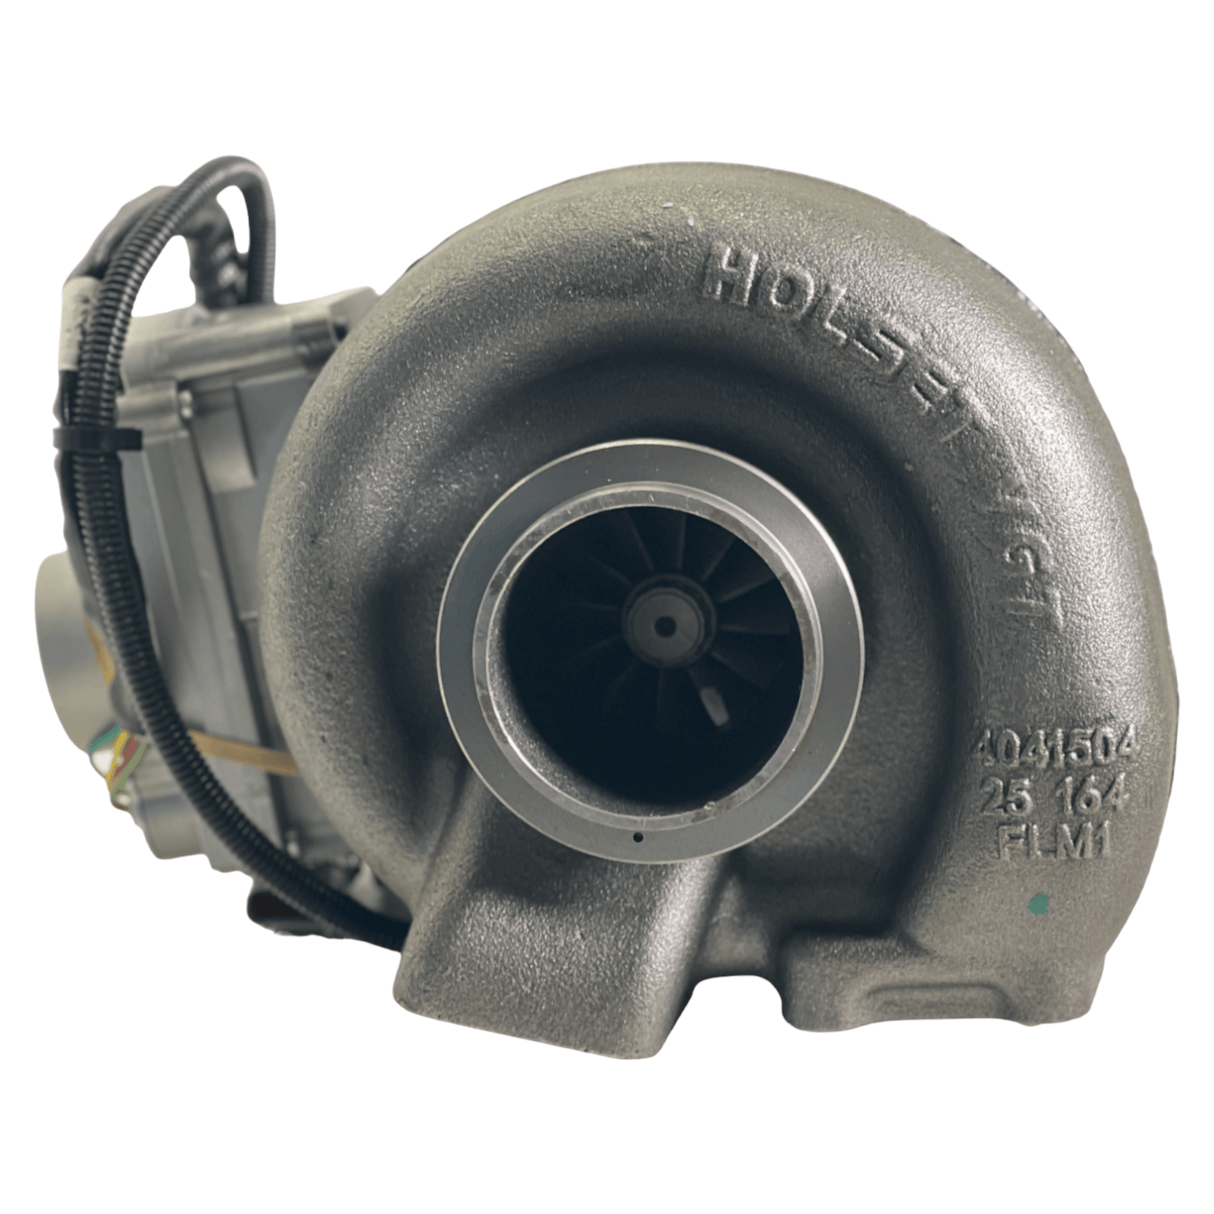 5322344Rx 5325947 Genuine Cummins® Vgt Turbocharger He351Ve With Actuator.